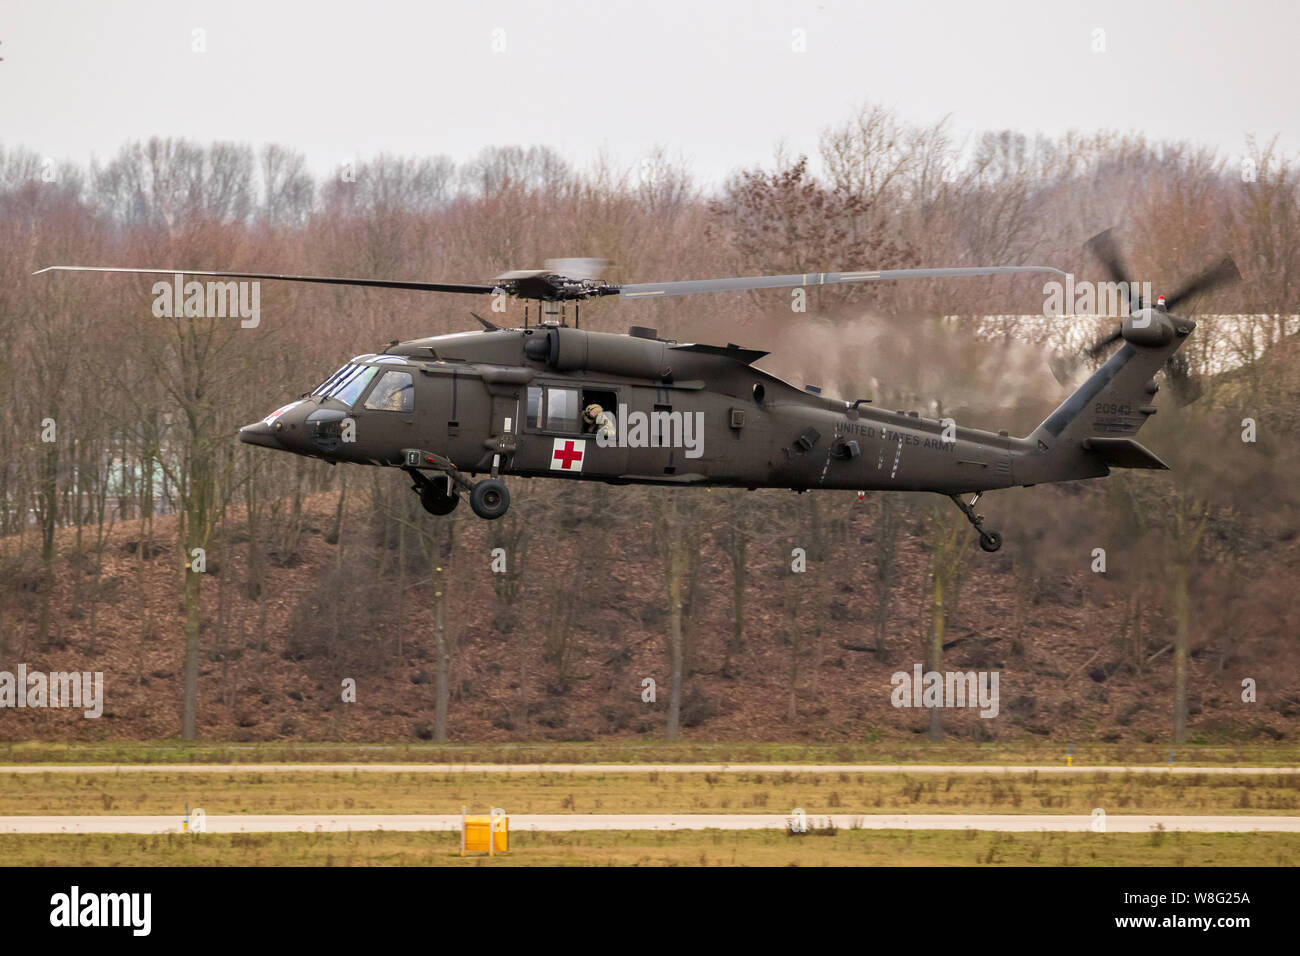 EINDHOVEN, THE NETHERLANDS - FEB 2, 2019: United States Army Sikorsky HH-60M Blackhawk transport helicopter in flight. Stock Photo